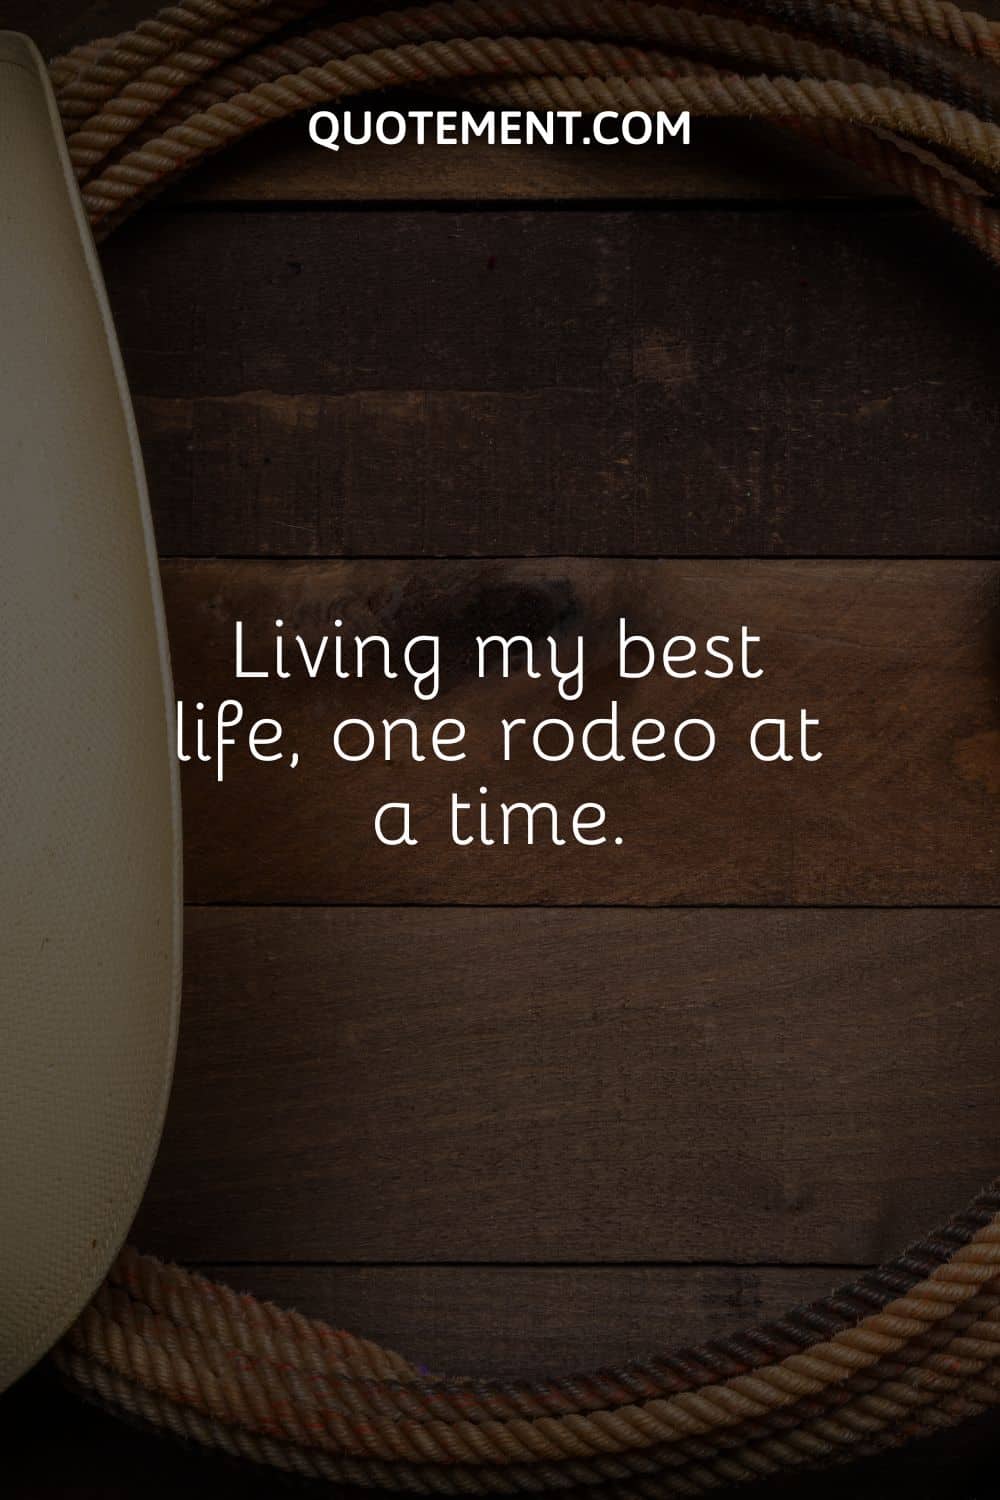 a rodeo rope on a wooden surface representing the coolest rodeo caption
